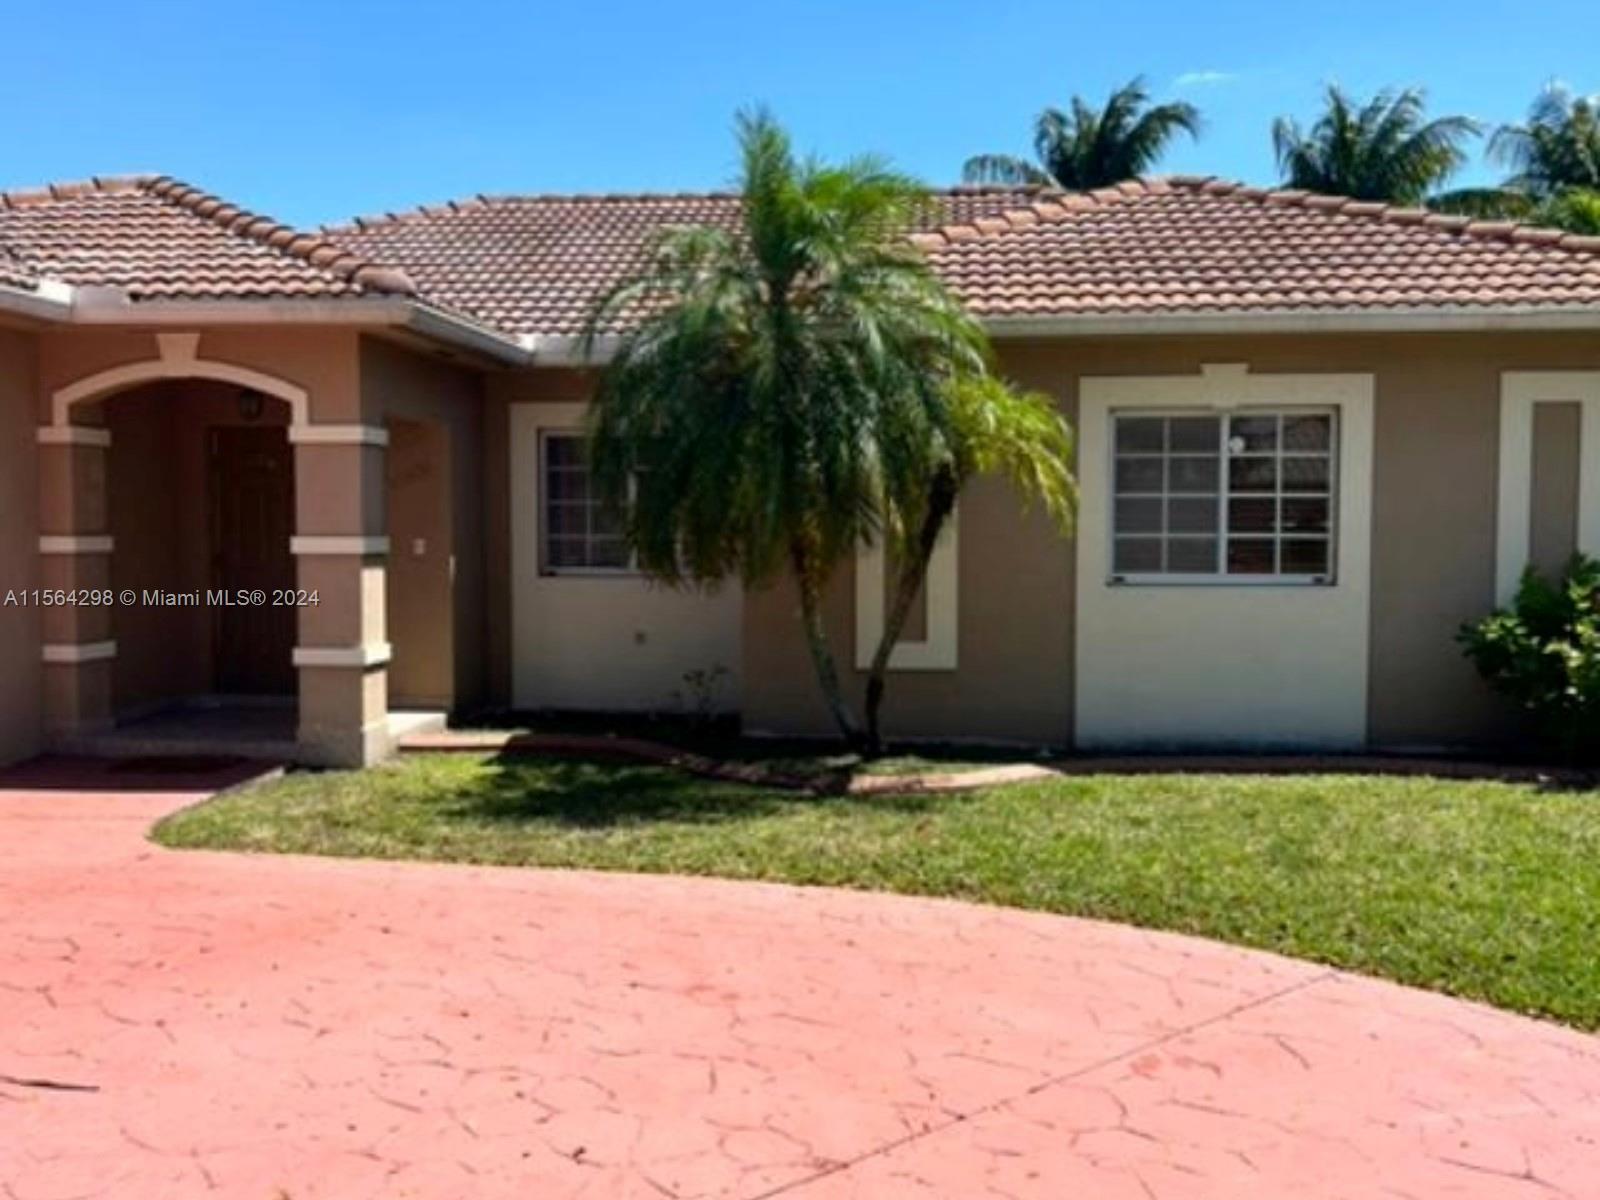 Photo of 16631 NW 89th Pl in Miami Lakes, FL